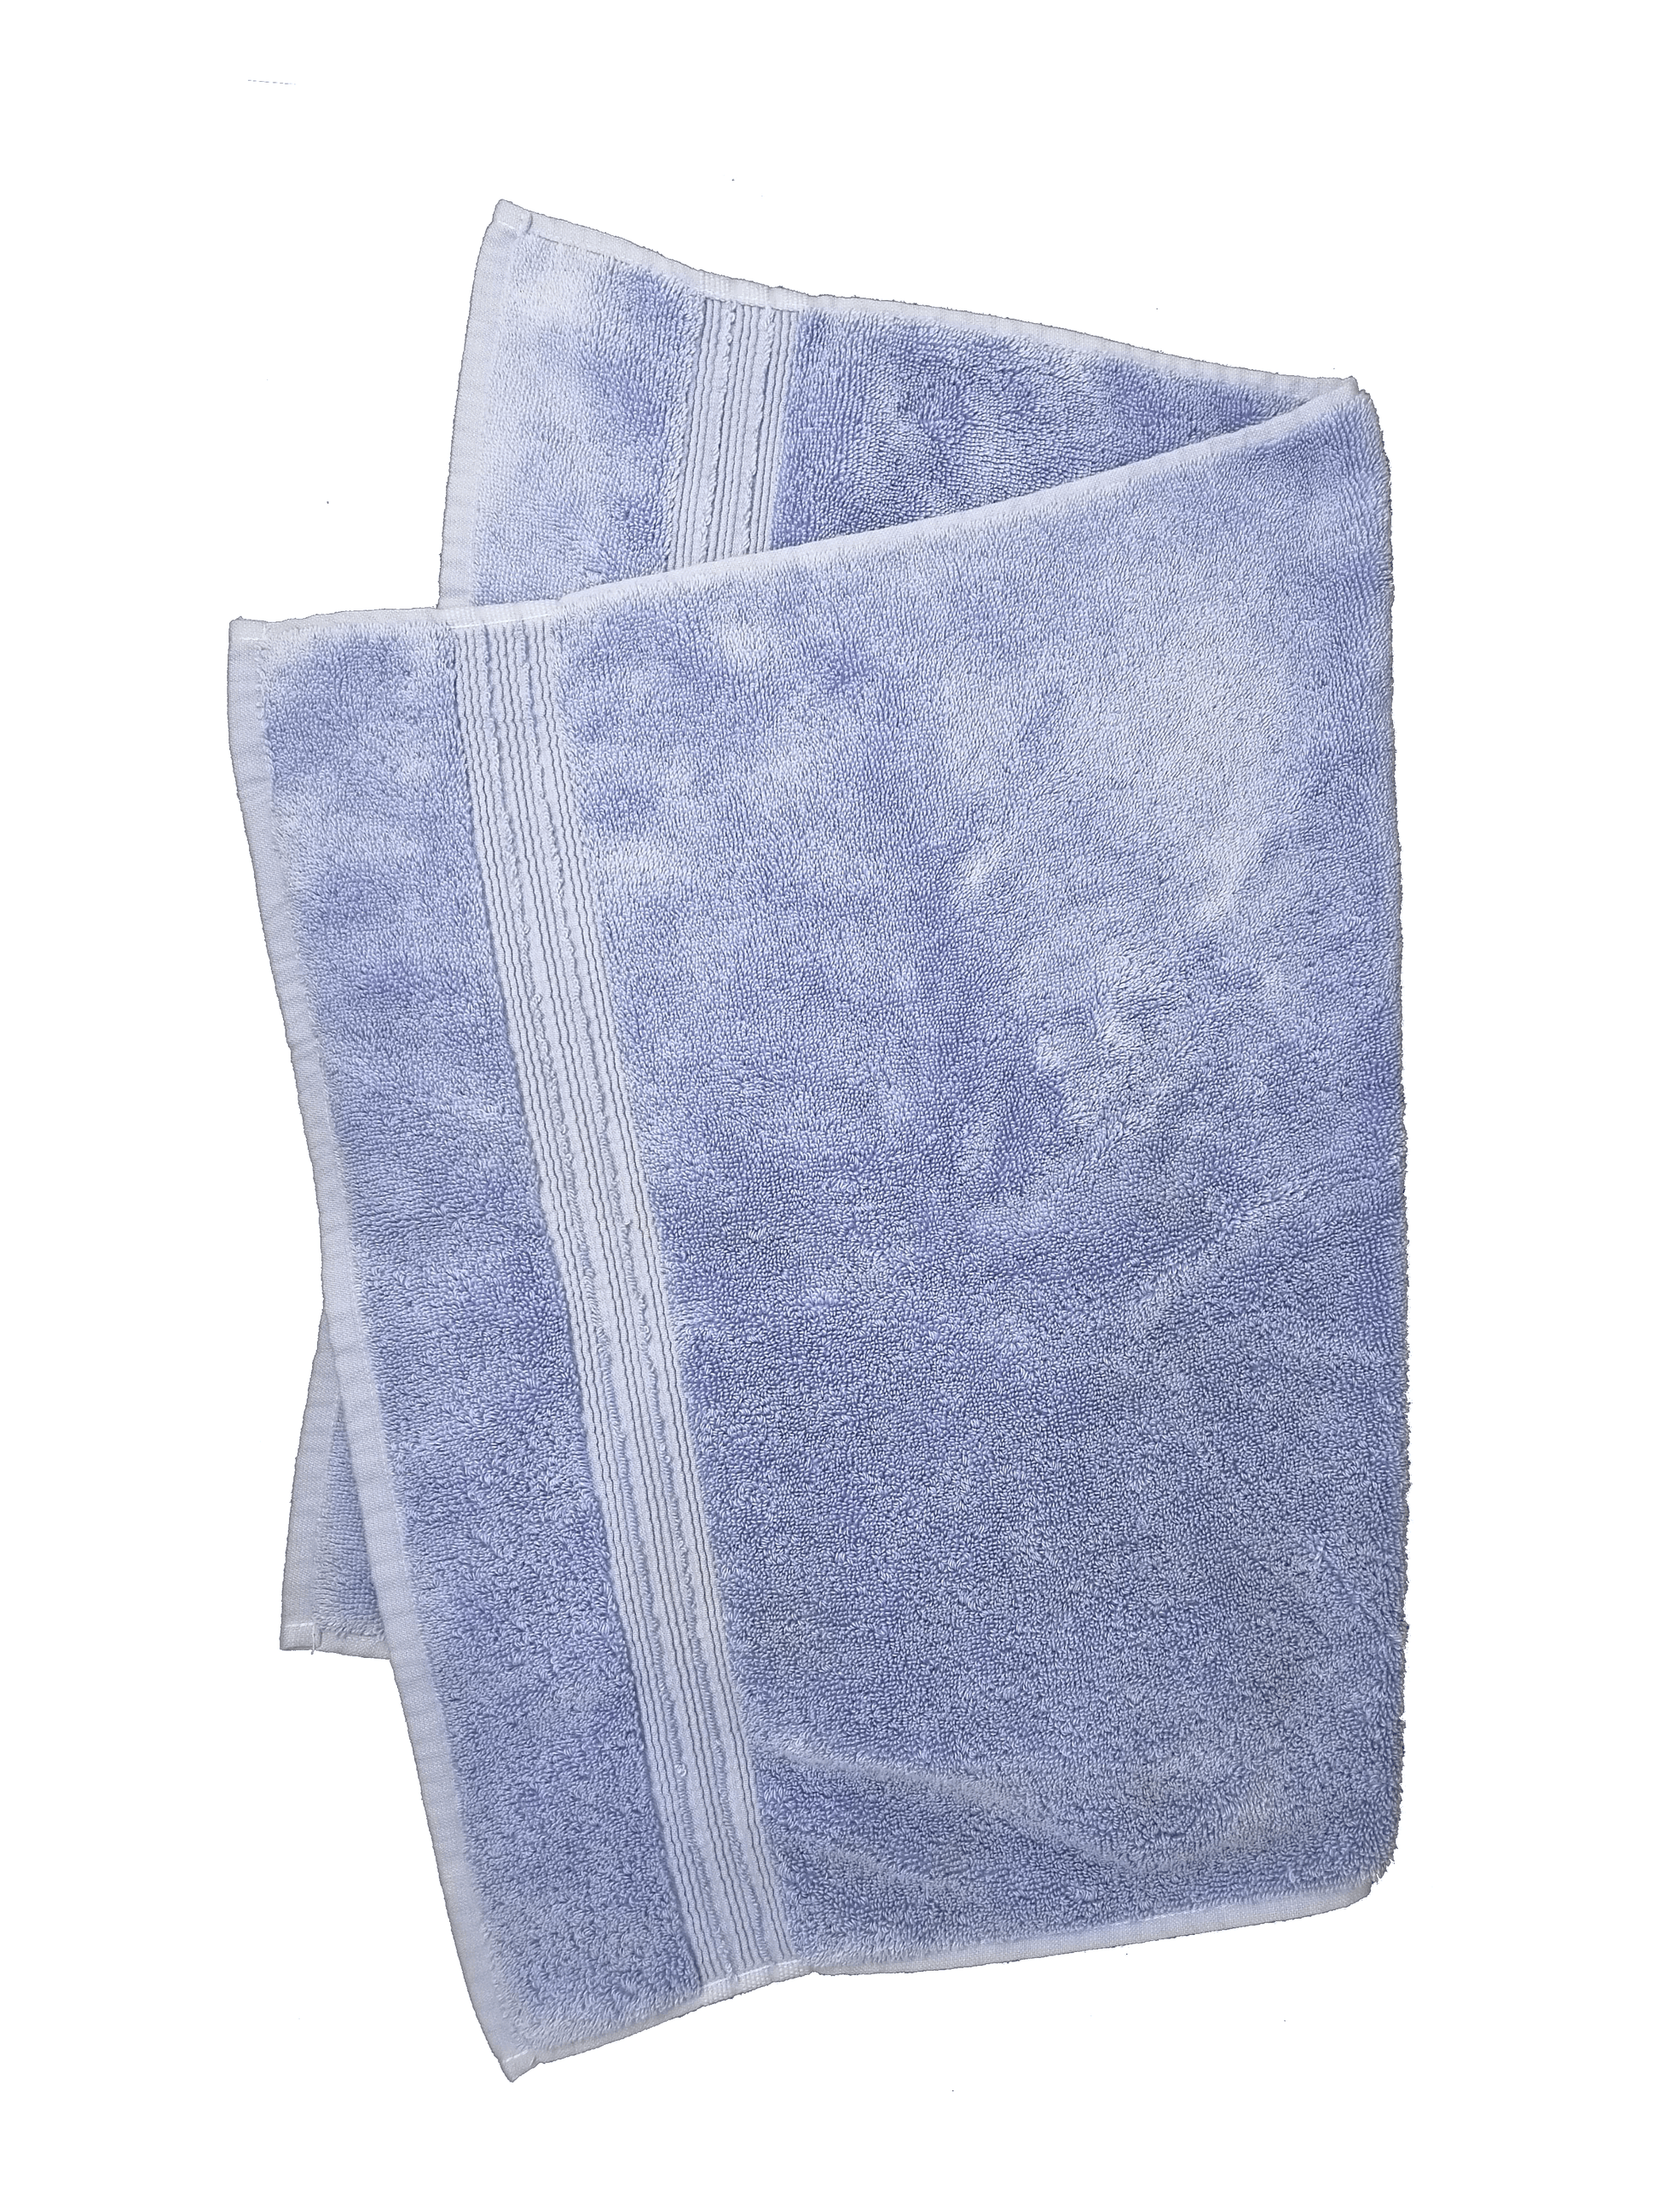 Hotel Collection Towels 46 cm x 71 cm HOTEL COLLECTION - Hand Towel